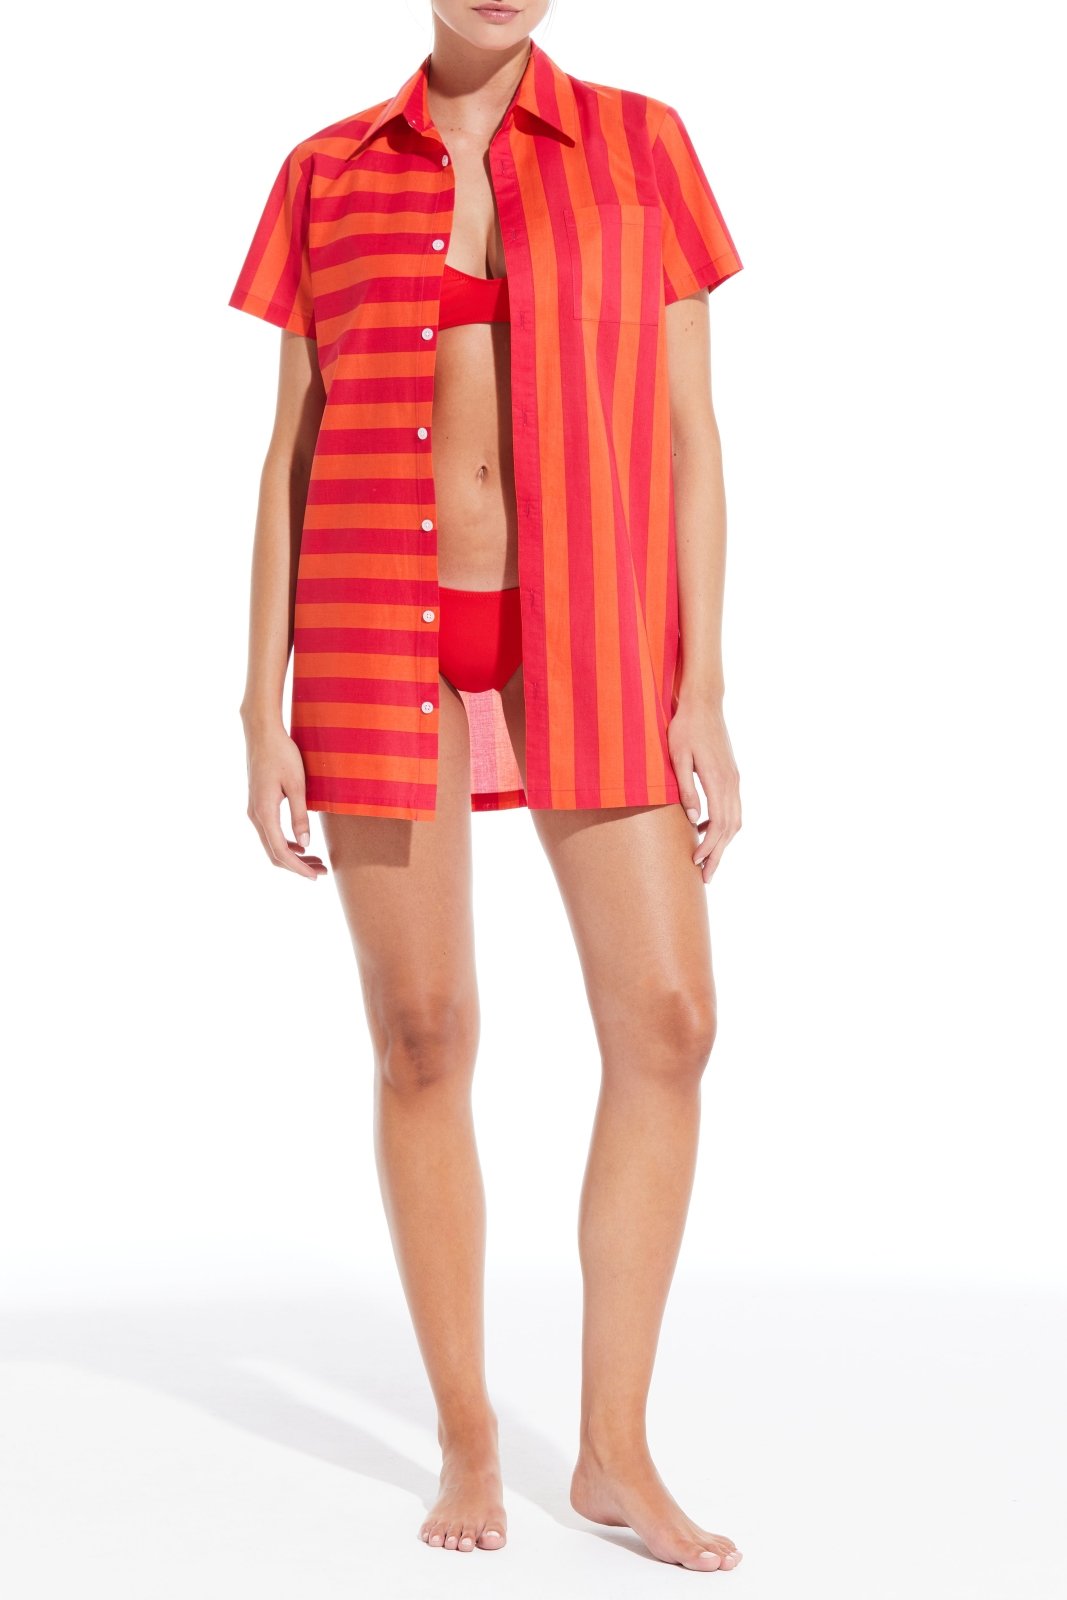 The Cabana Dress - Solid & Striped